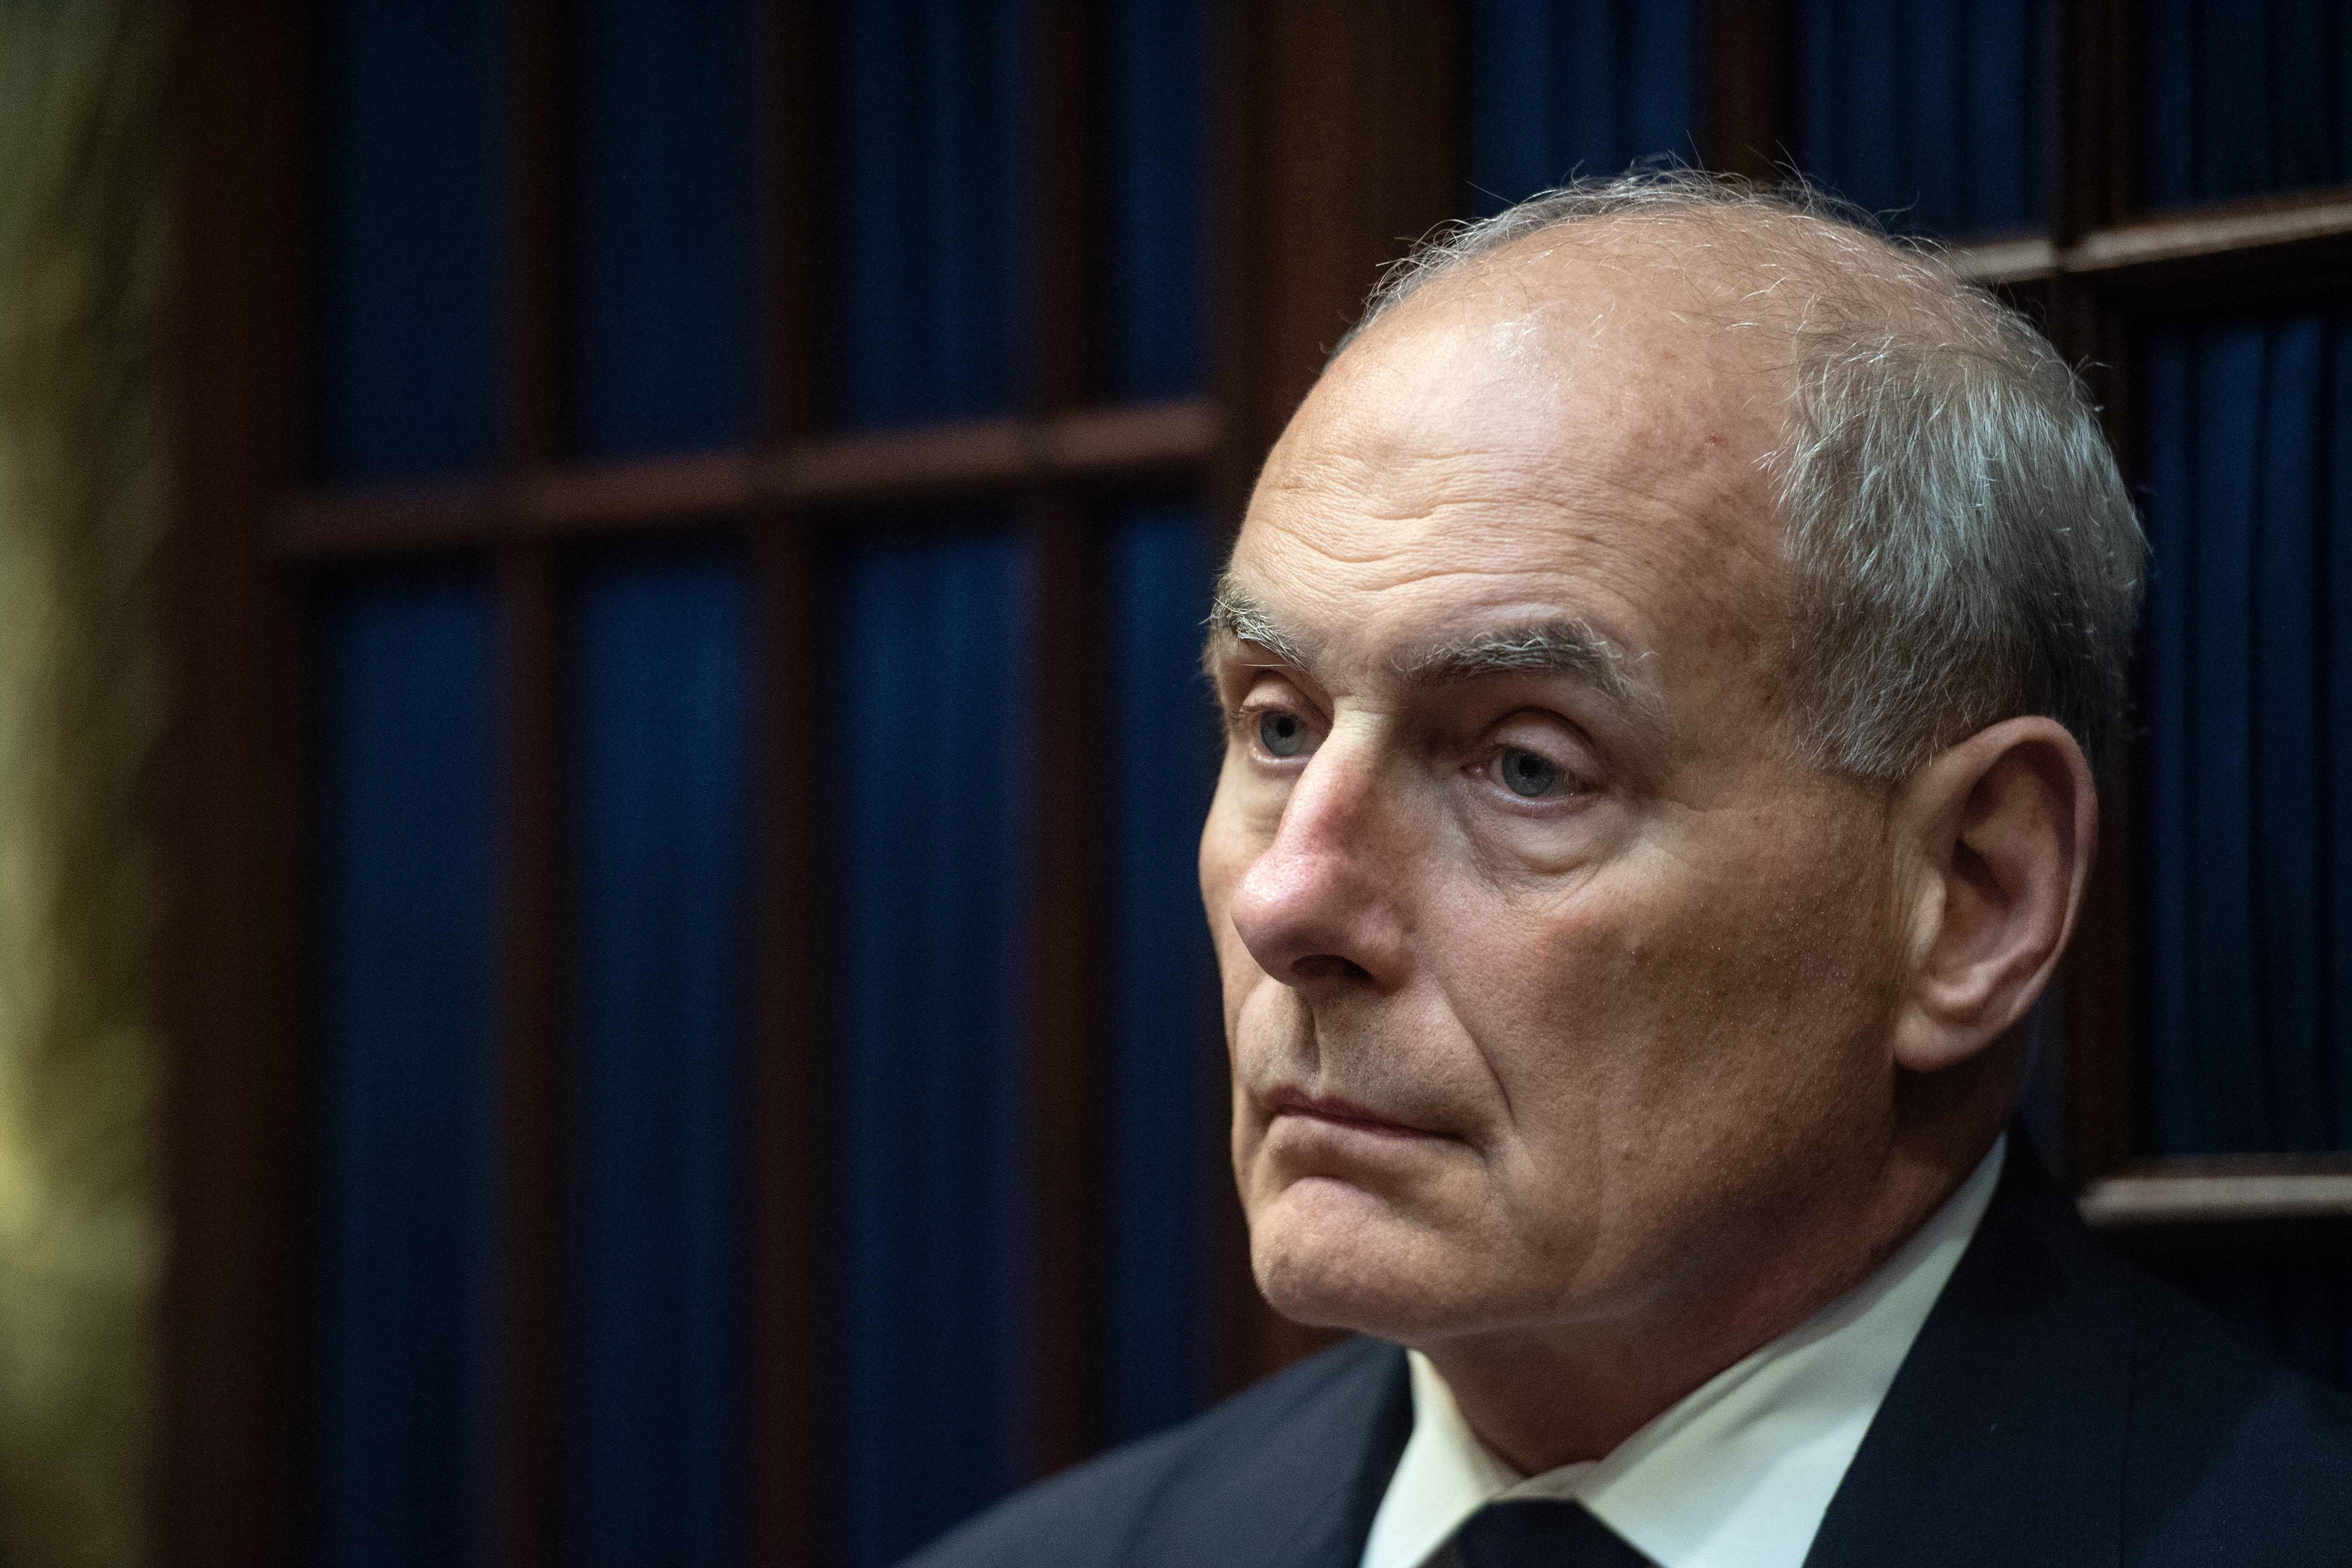 John Kelly, then White House chief of staff, attends a meeting at the White House on September 5, 2018.